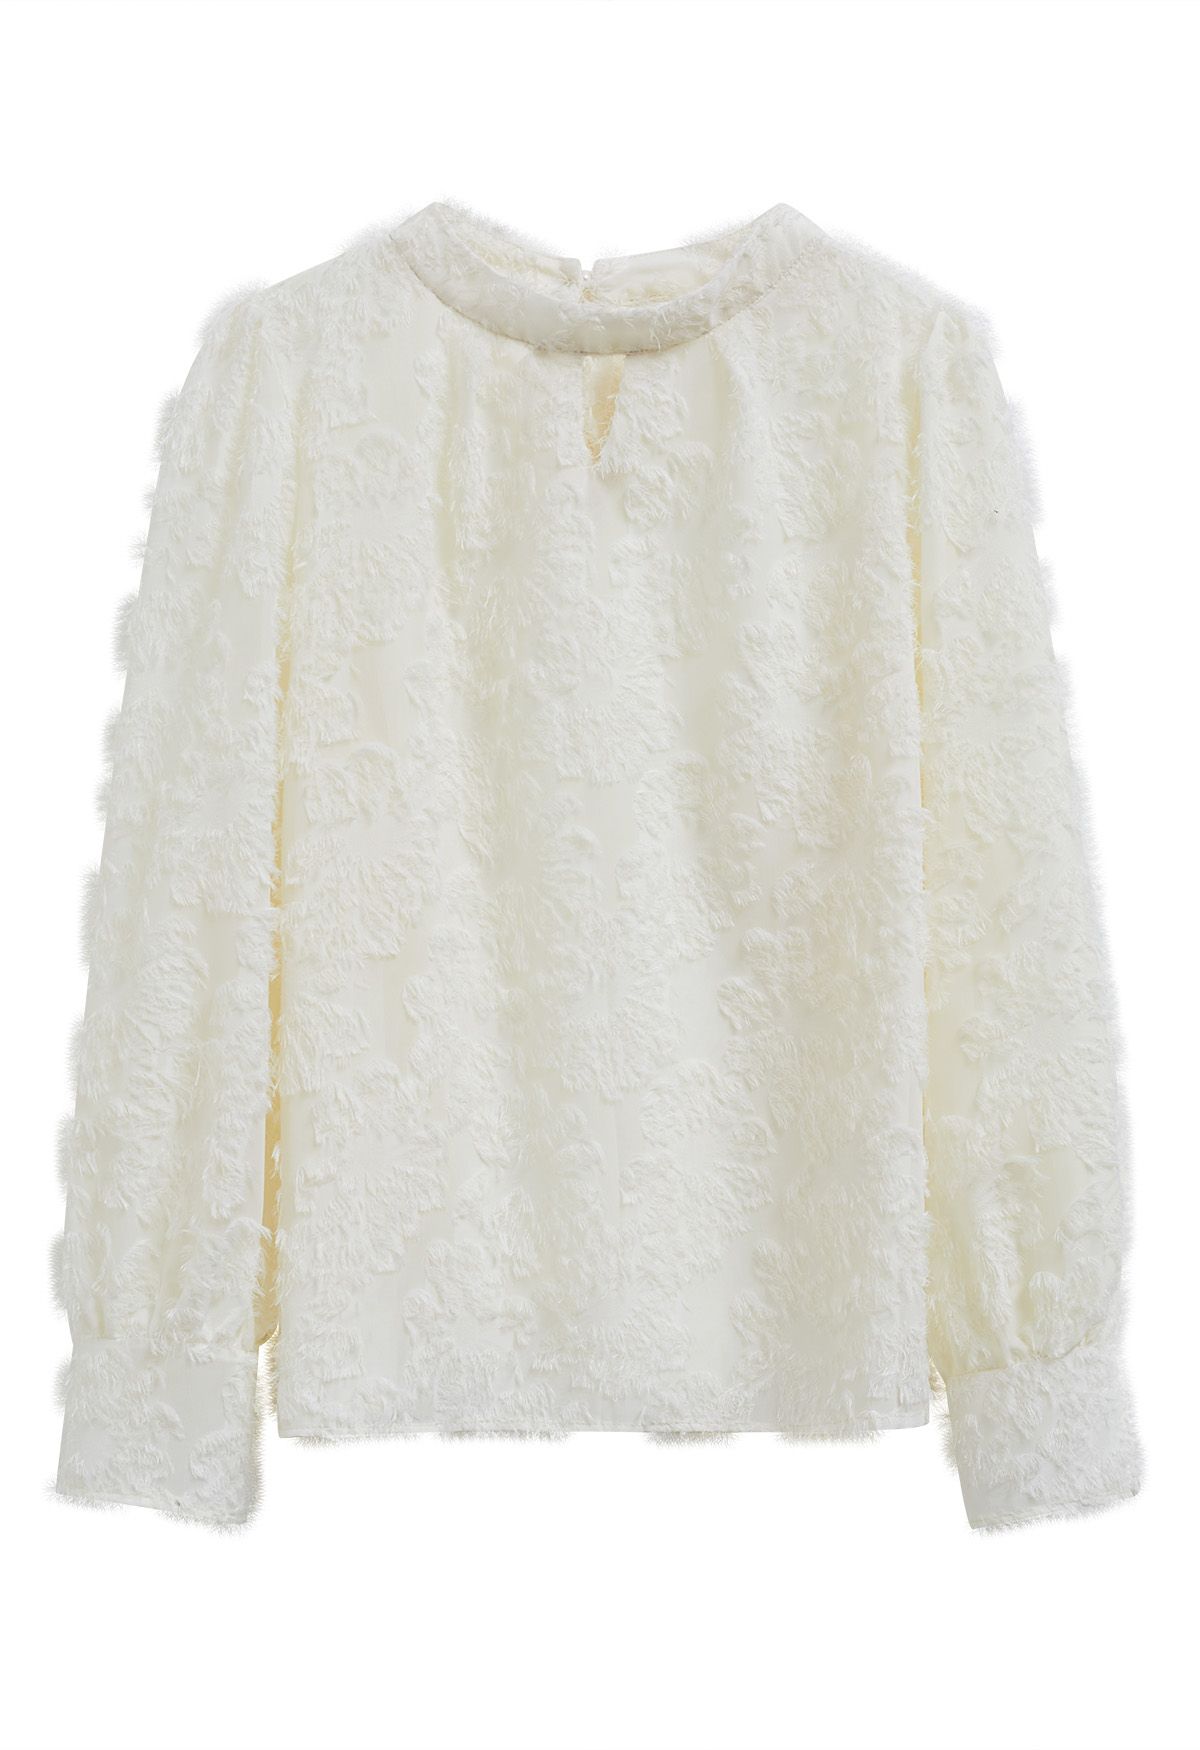 Fringed Floral Cutout Detail Top in Ivory